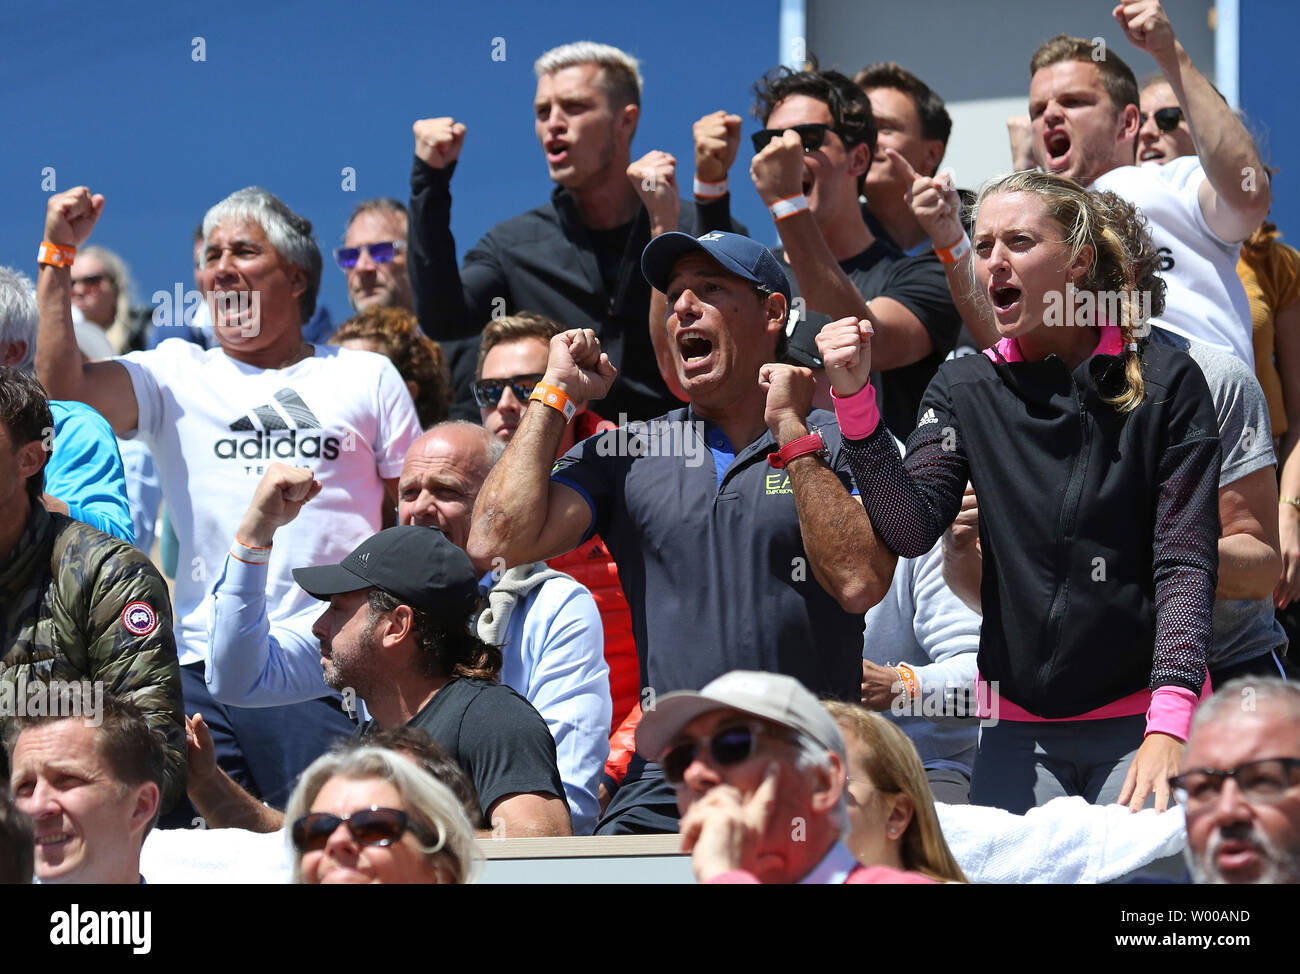 Spectators in the player's box of Dominic Thiem, including his girlfriend  Kristina 'Kiki' Mladenovic (R), react after a point during the French Open  semi-finals match between Them and Novak Djokovic of Serbia